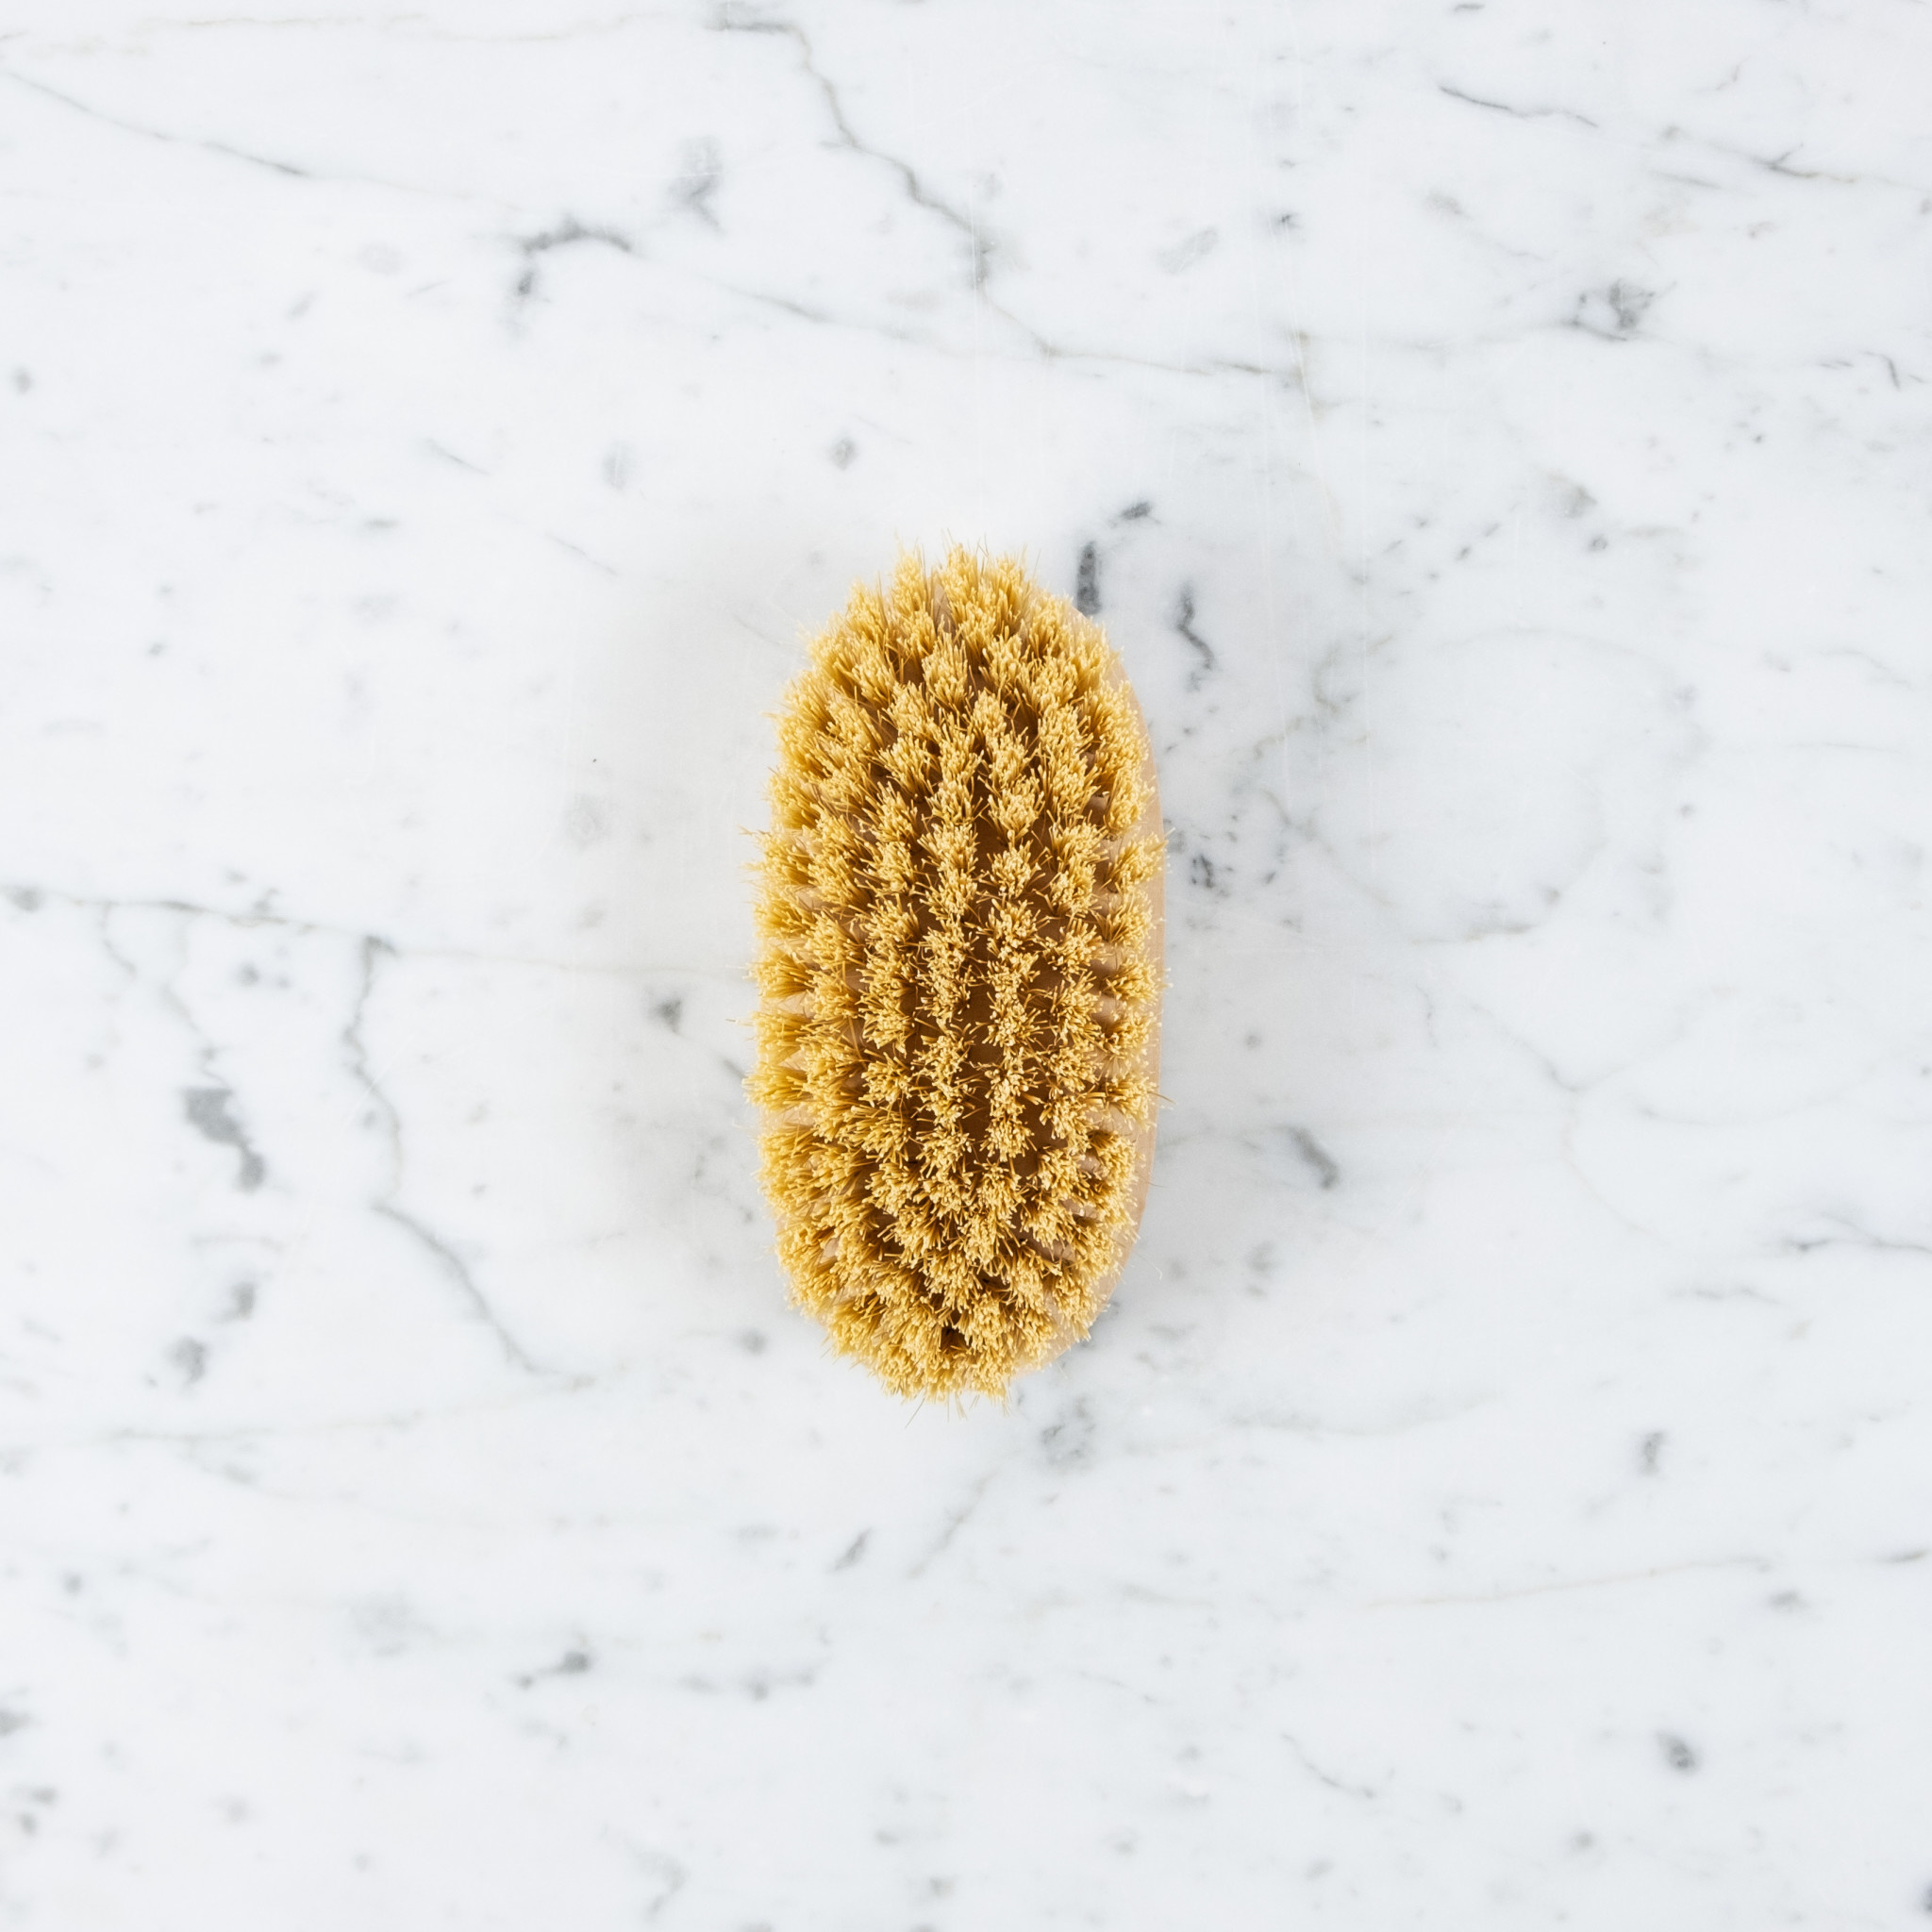 Little Oval Handleless Shoe or Cleaning Brush - Stiff Tampico Bristles